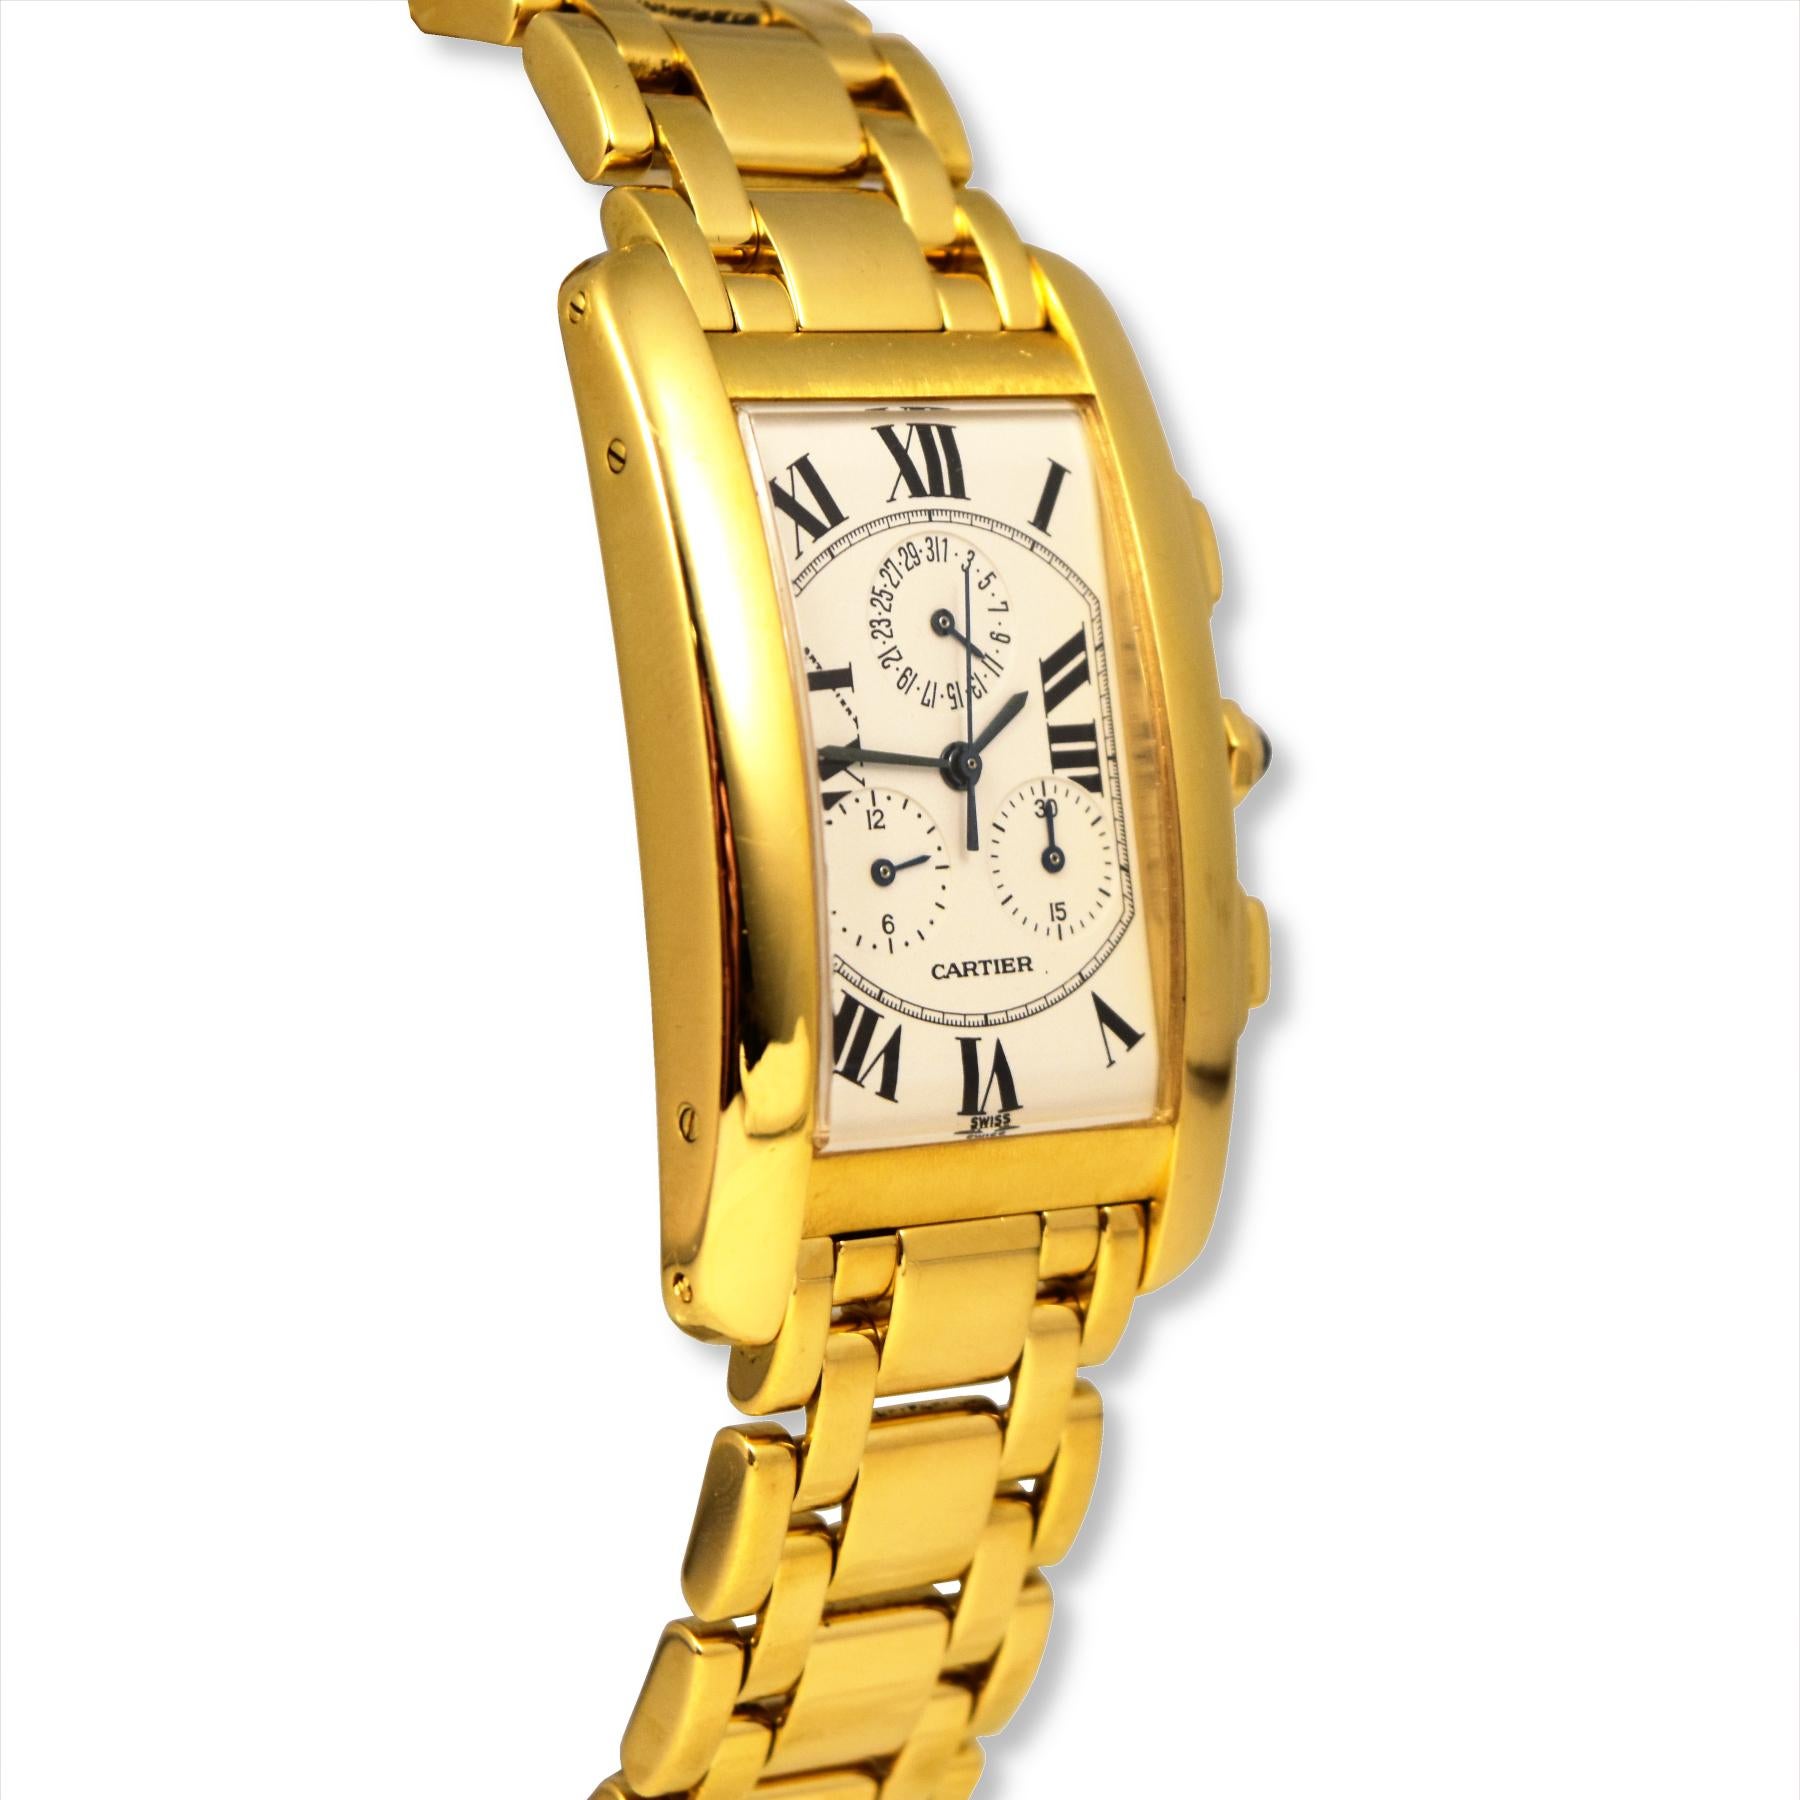 Brand: Cartier 
Model Name: Tank Americaine
Model Number:  1730
Movement: Automatic
Case Size: 26 mm
Case Back: Closed 
Case Material: Yellow Gold
Bezel: Yellow Gold
Dial: White
Bracelet:  Yellow Gold
Hour Markers: Roman Numeral
Features: Hours,